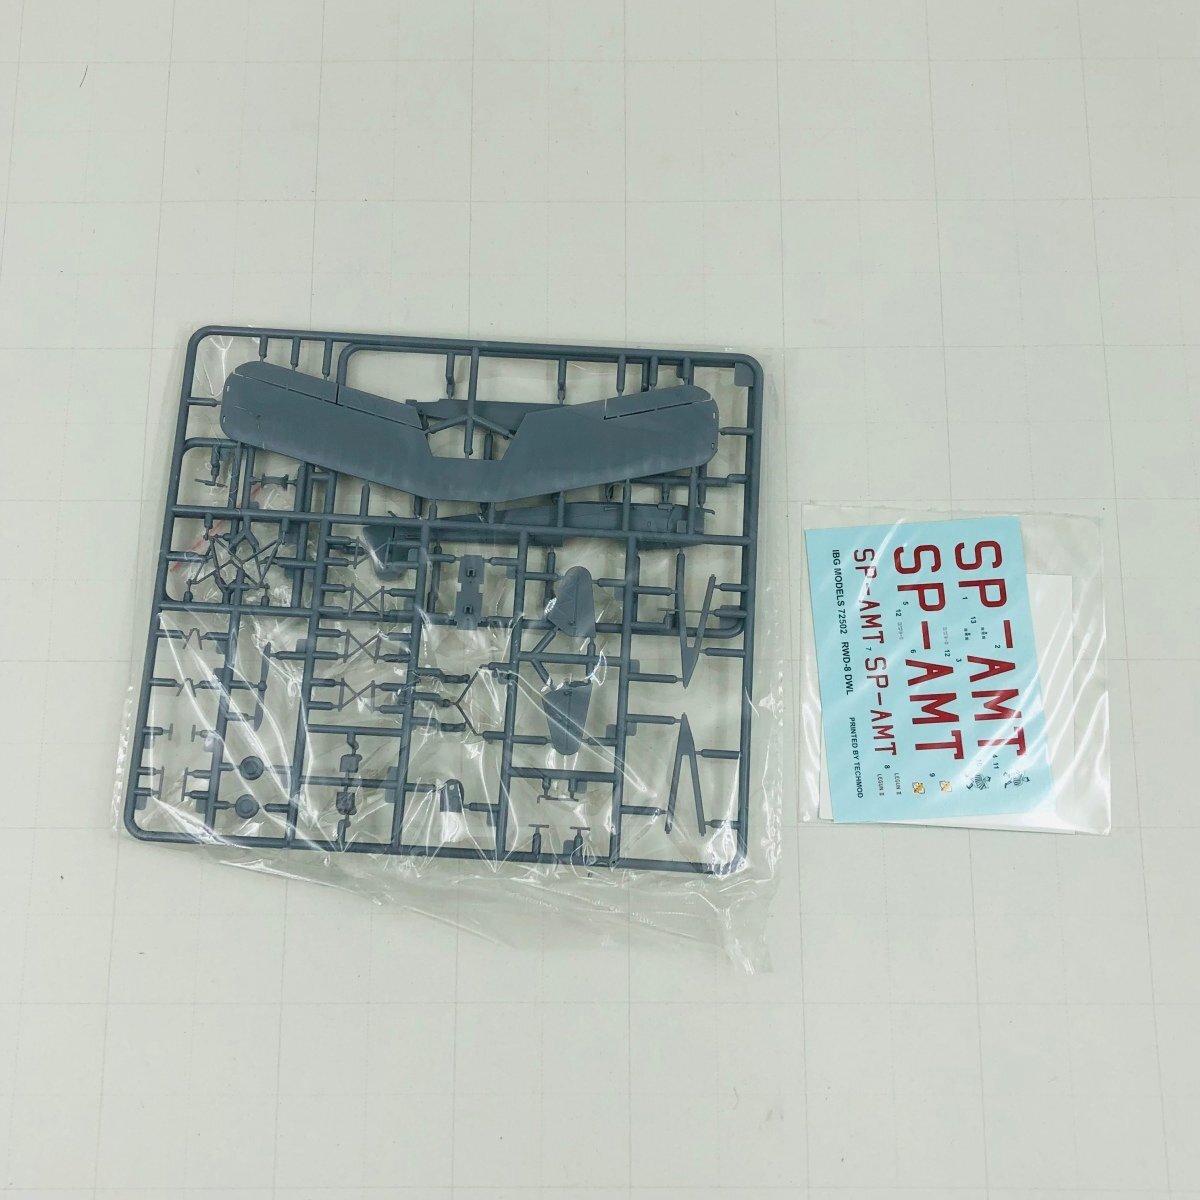  new goods not yet constructed IBG 1/72 Poland . seat practice machine RWD-8 PWS Germany *la flying a*sobieto specification 